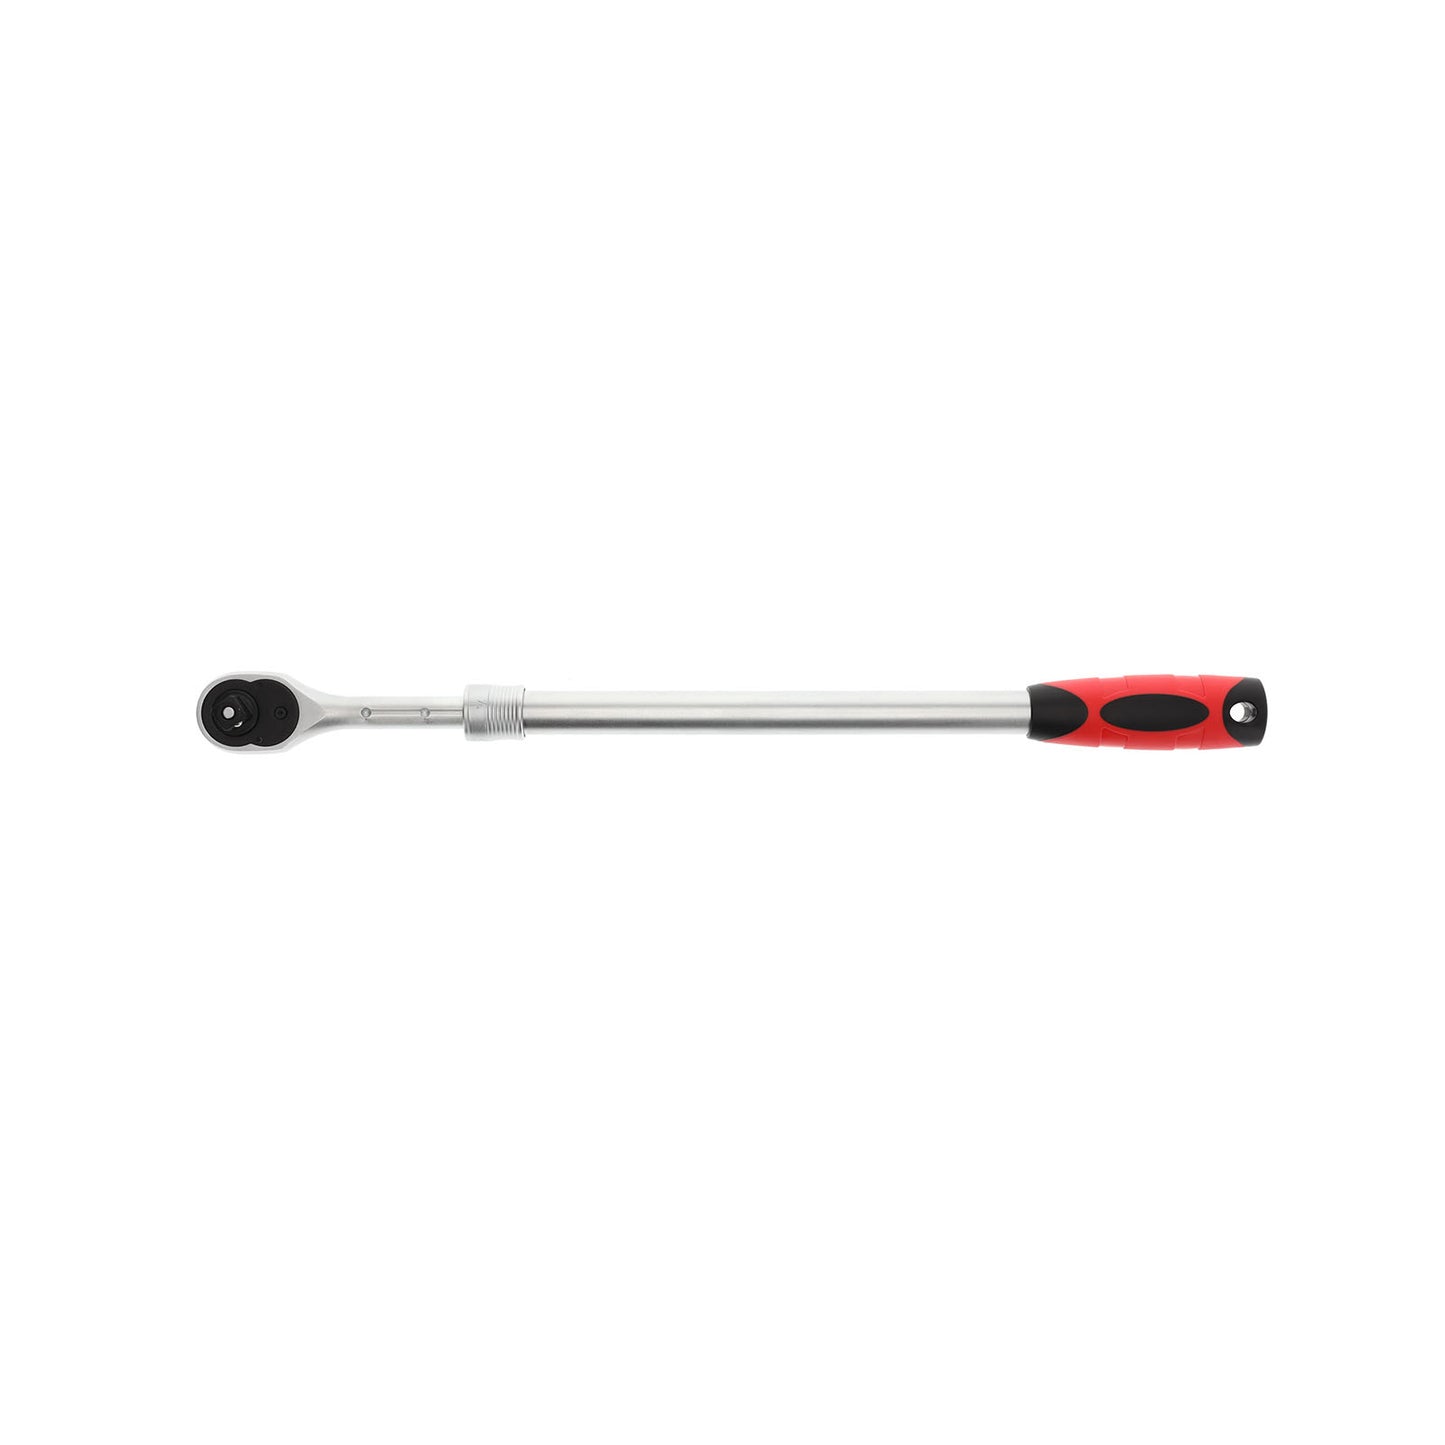 GEDORE red R60010027 - 1/2" telescopic ratchet 460-600 mm (3300522)